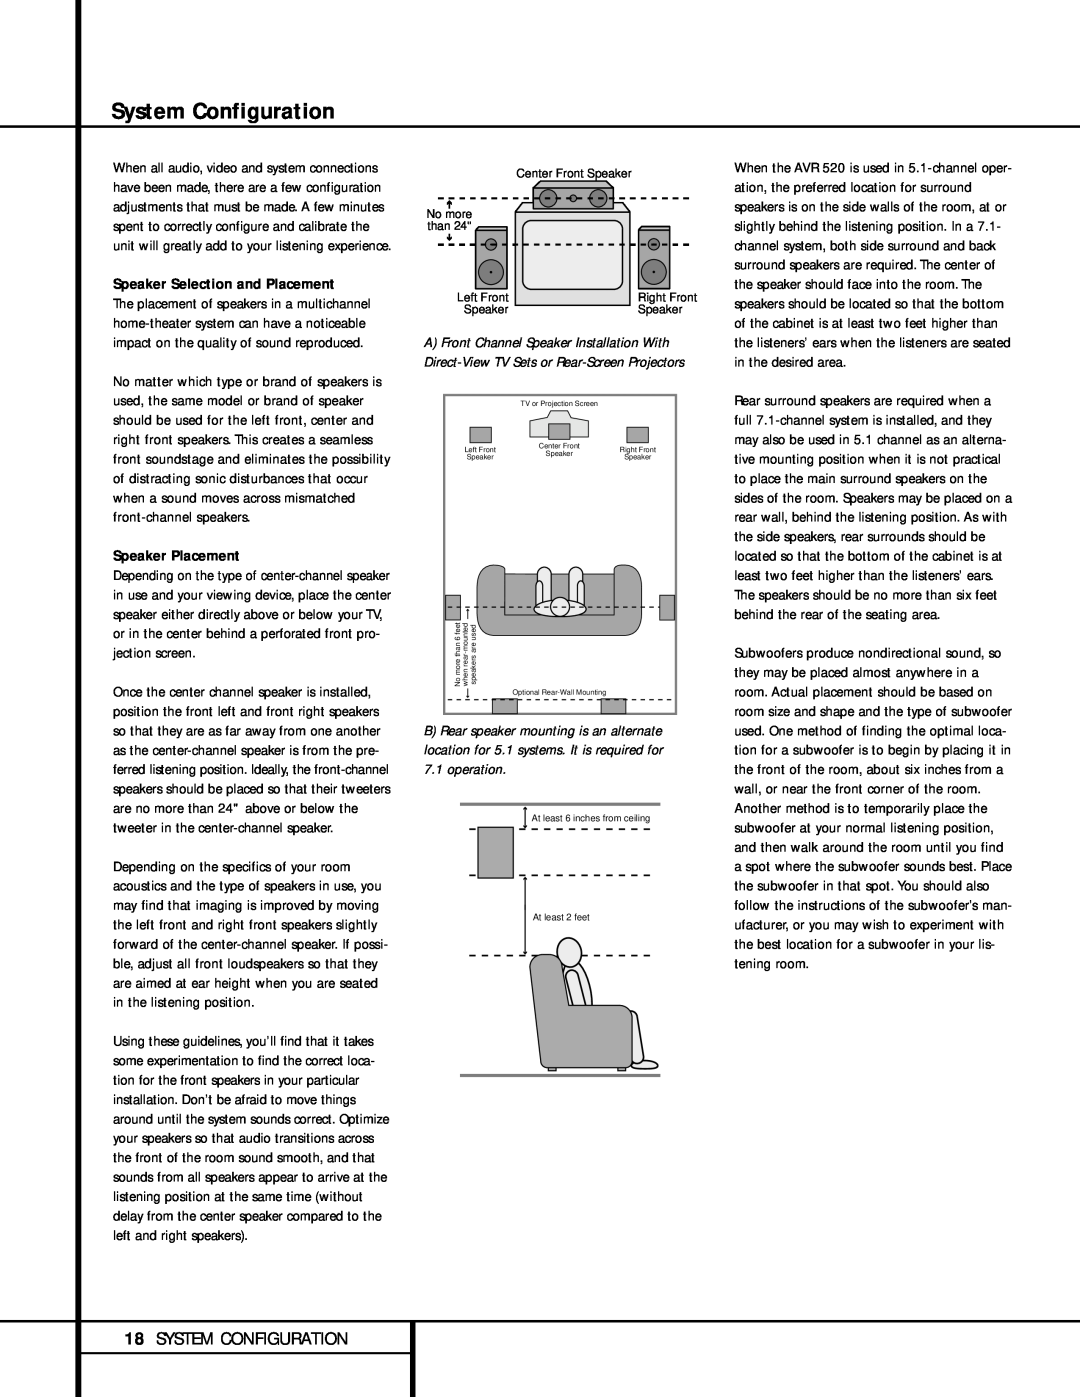 Harman-Kardon AVR 520 System Configuration, 18SYSTEM CONFIGURATION, Speaker Selection and Placement, Speaker Placement 